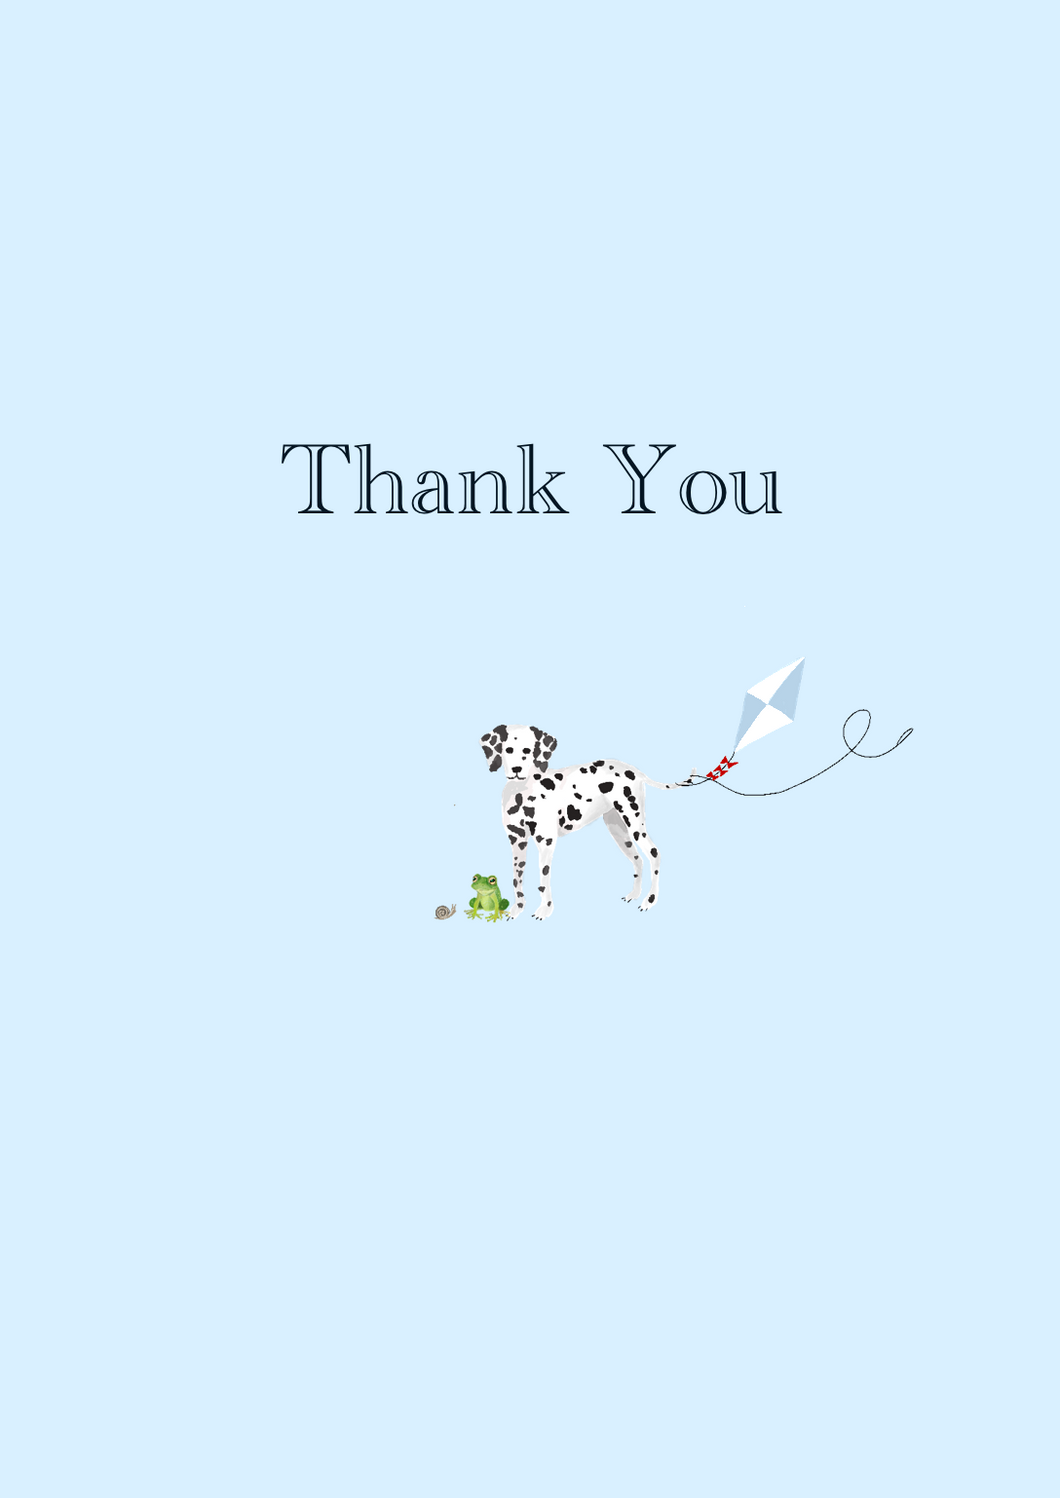 Frogs, Snails, and Puppy Dog Tails Thank You Cards